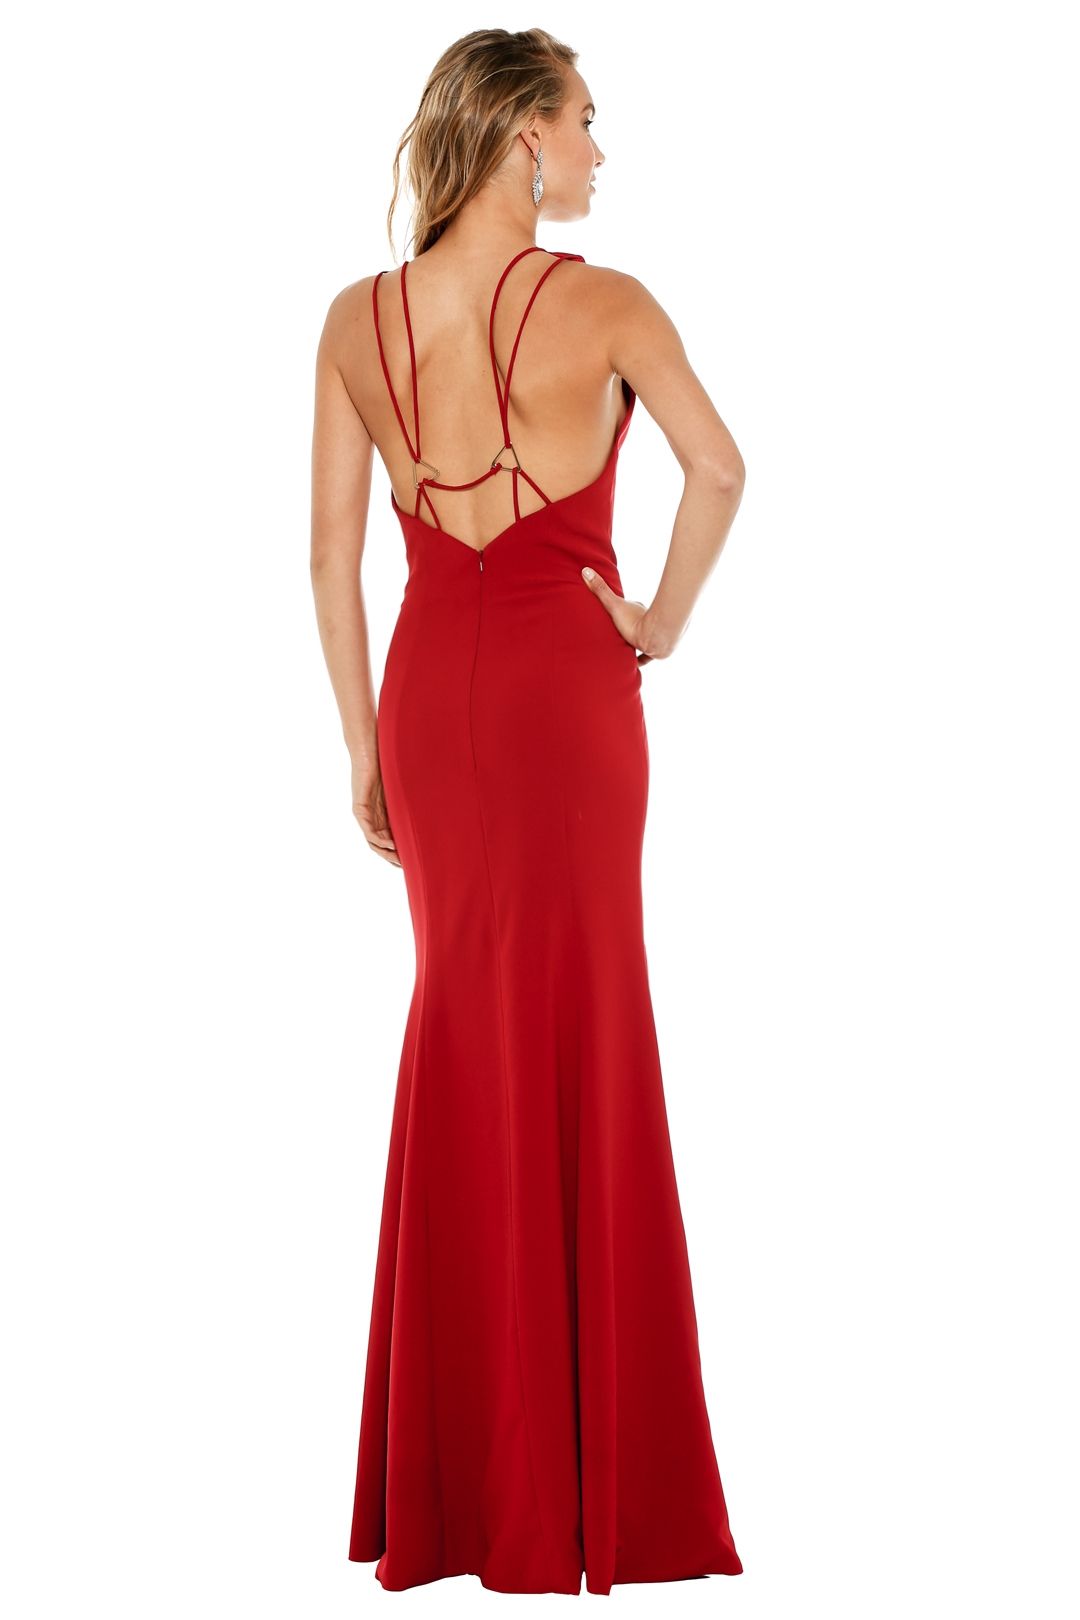 Fame & Partners - Pavo Dress - Red - Back